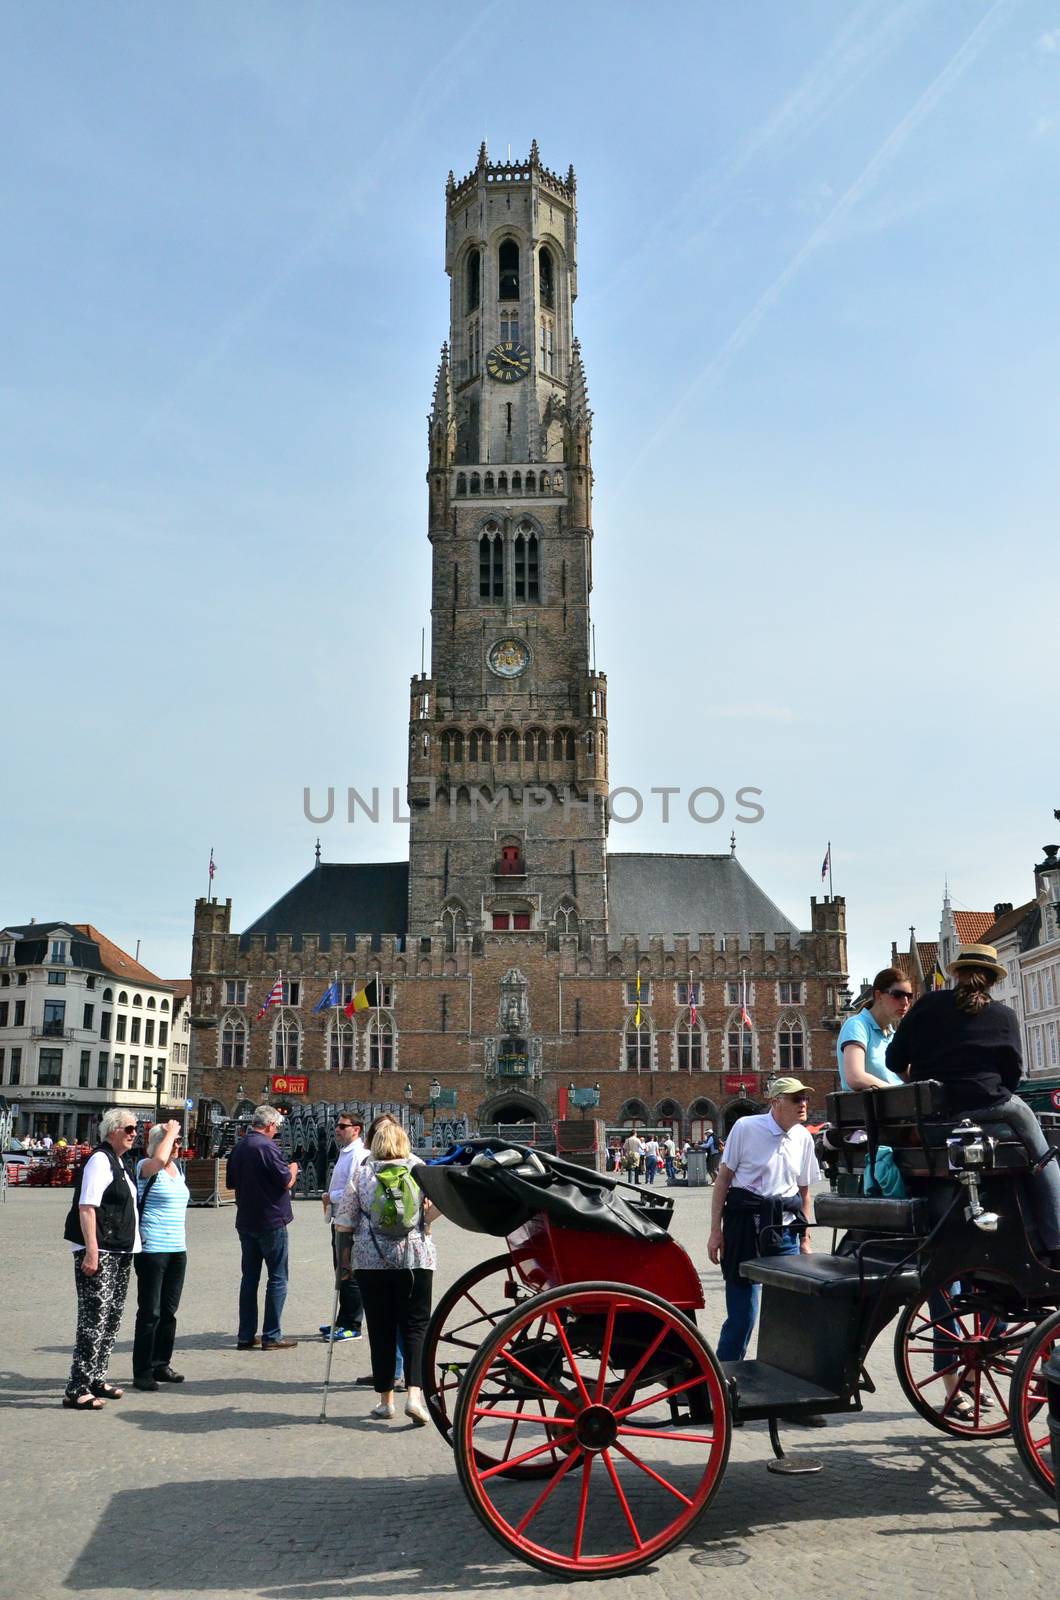 Bruges, Belgium - May 11, 2015: Tourist visit Belfry of Bruges on Grote Markt square on May 11, 2015. The historic city centre is a prominent World Heritage Site of UNESCO.